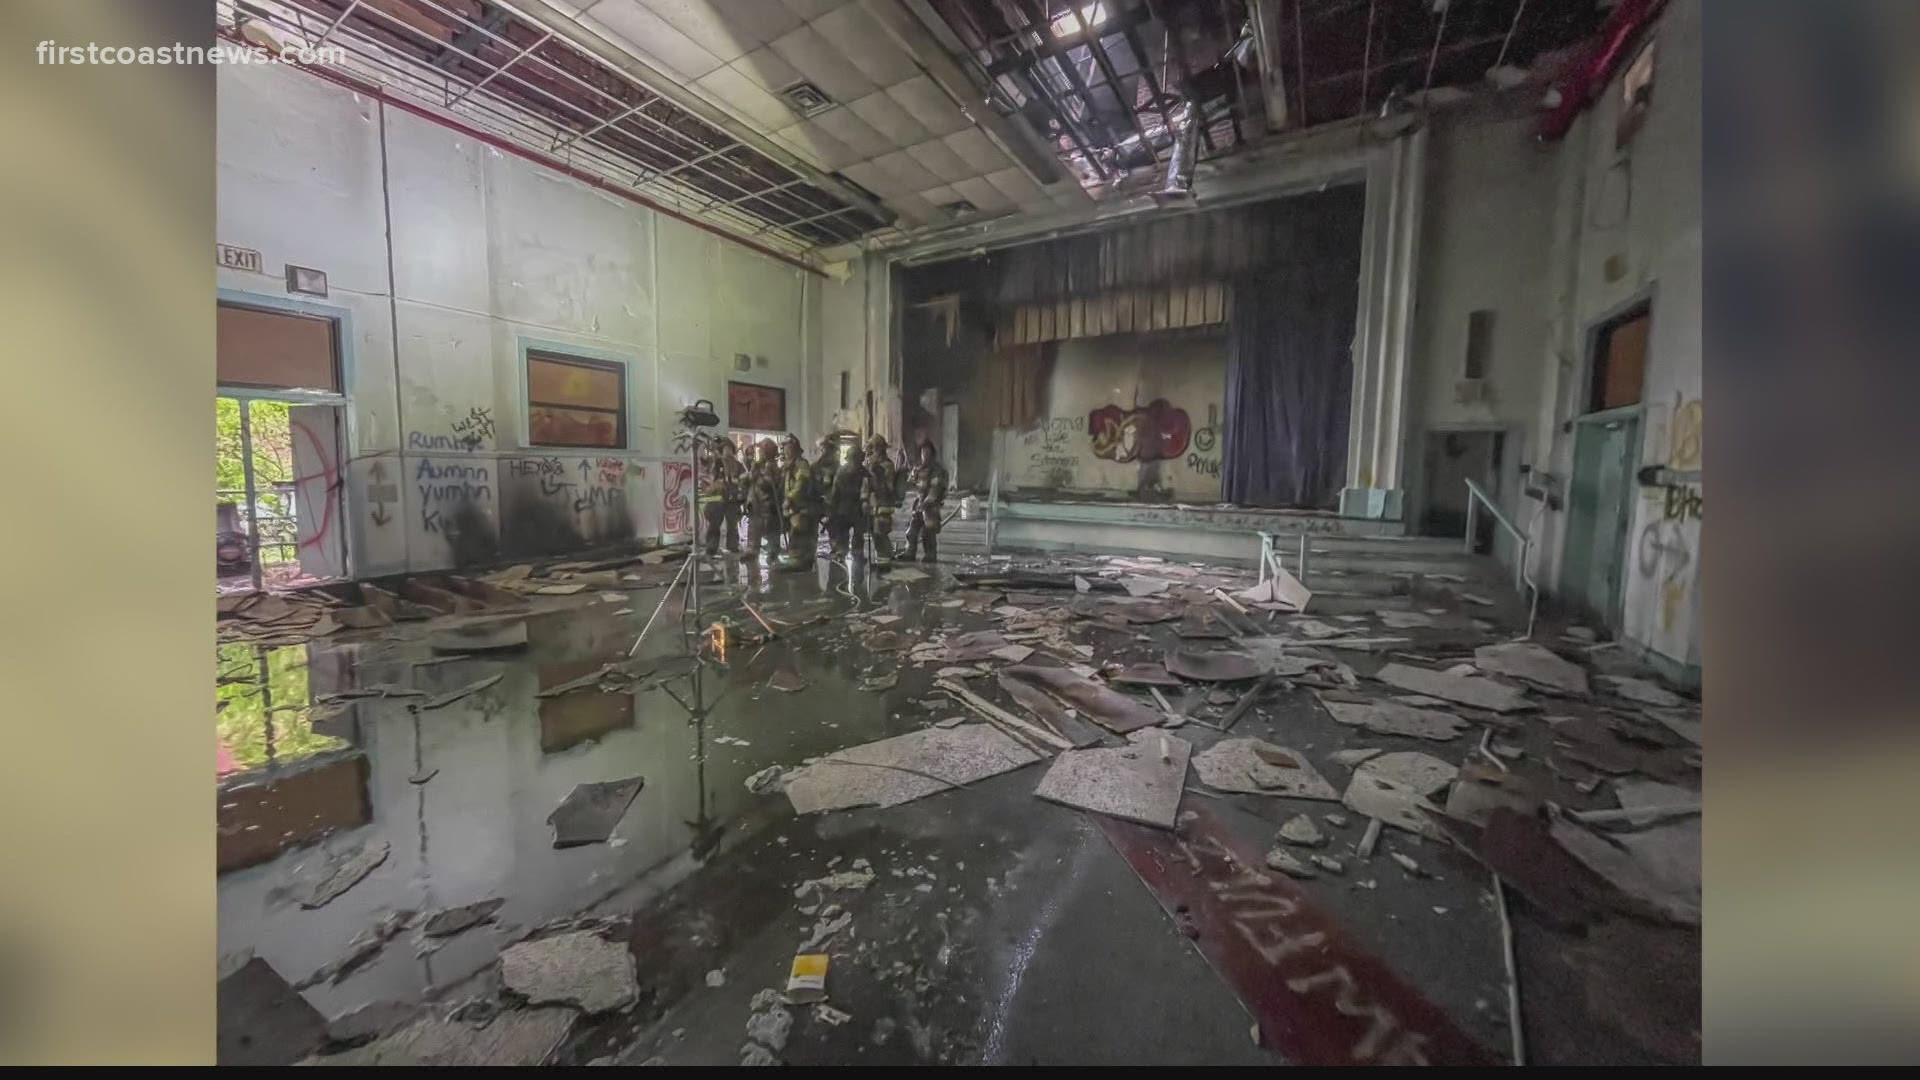 Jacksonville firefighters say "suspicious fire" damaged century-old abandoned school